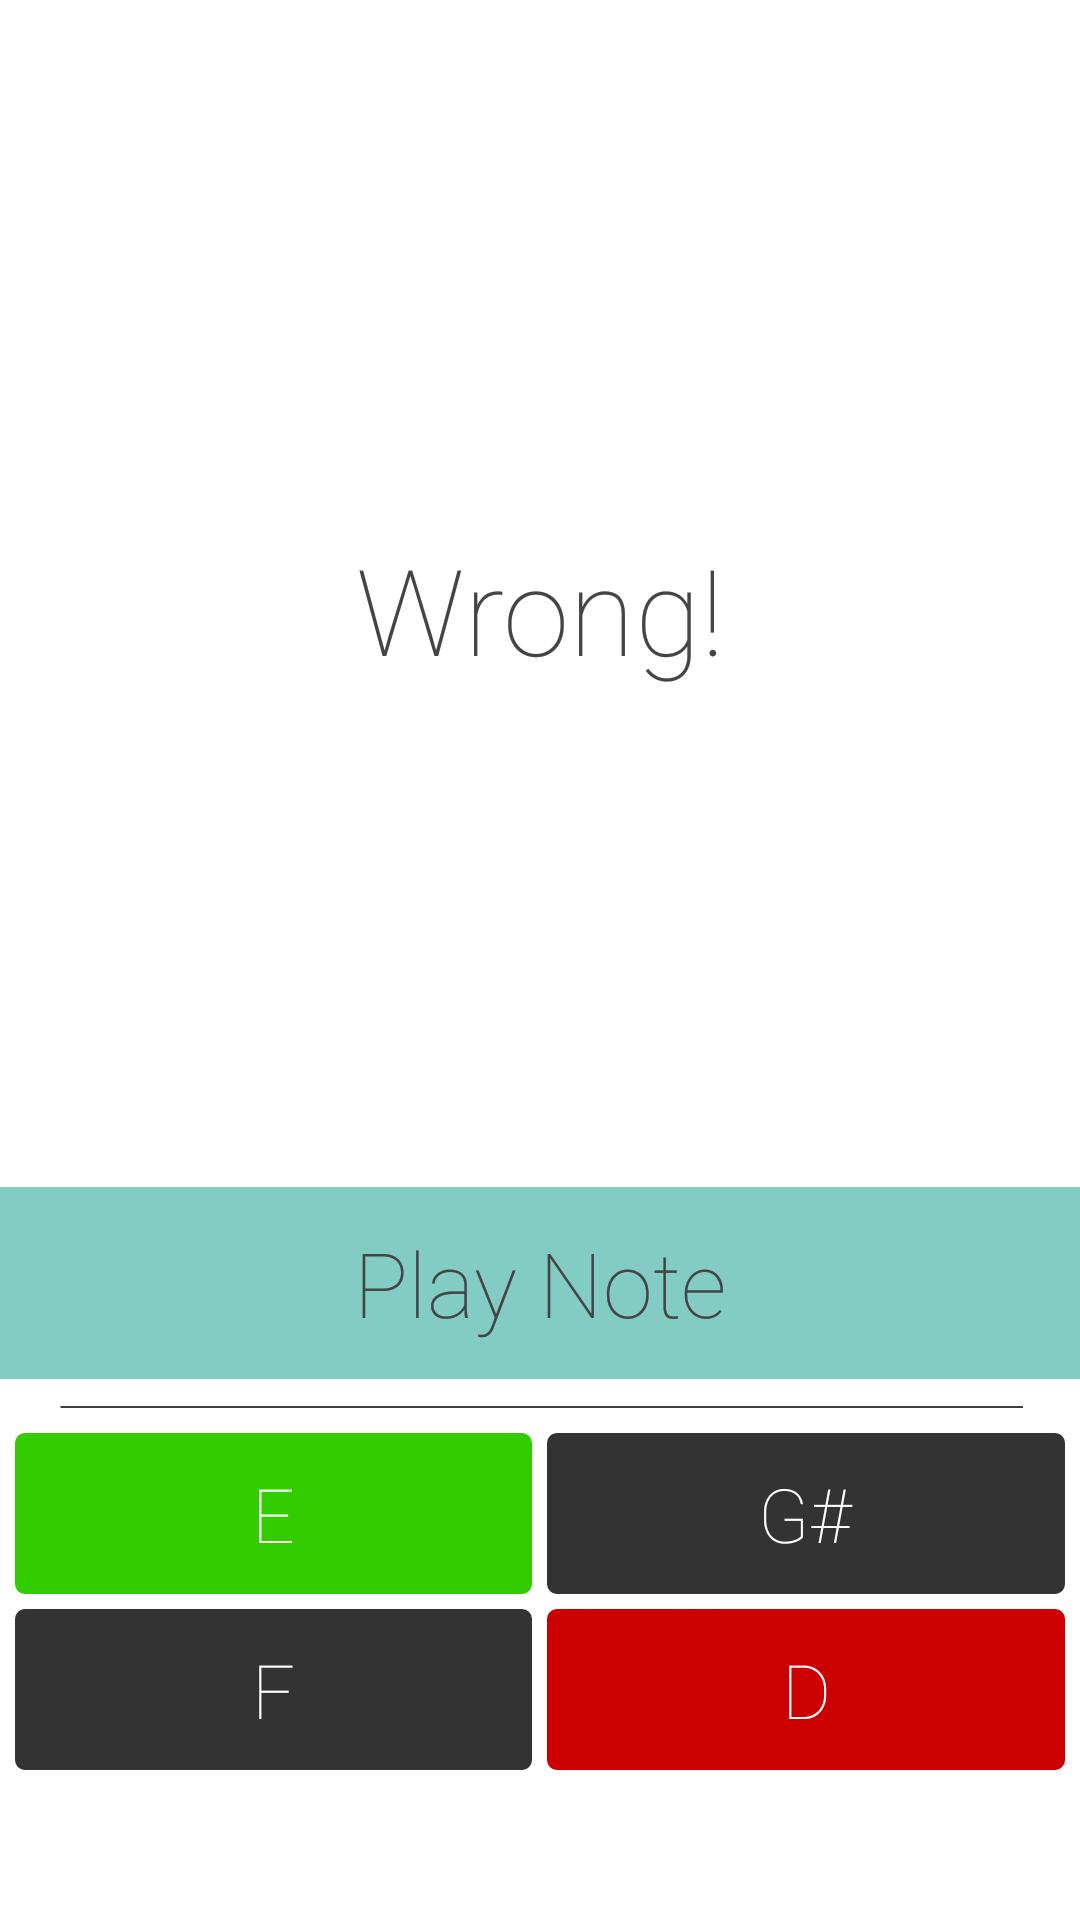 Guess The Note for Android - APK Download